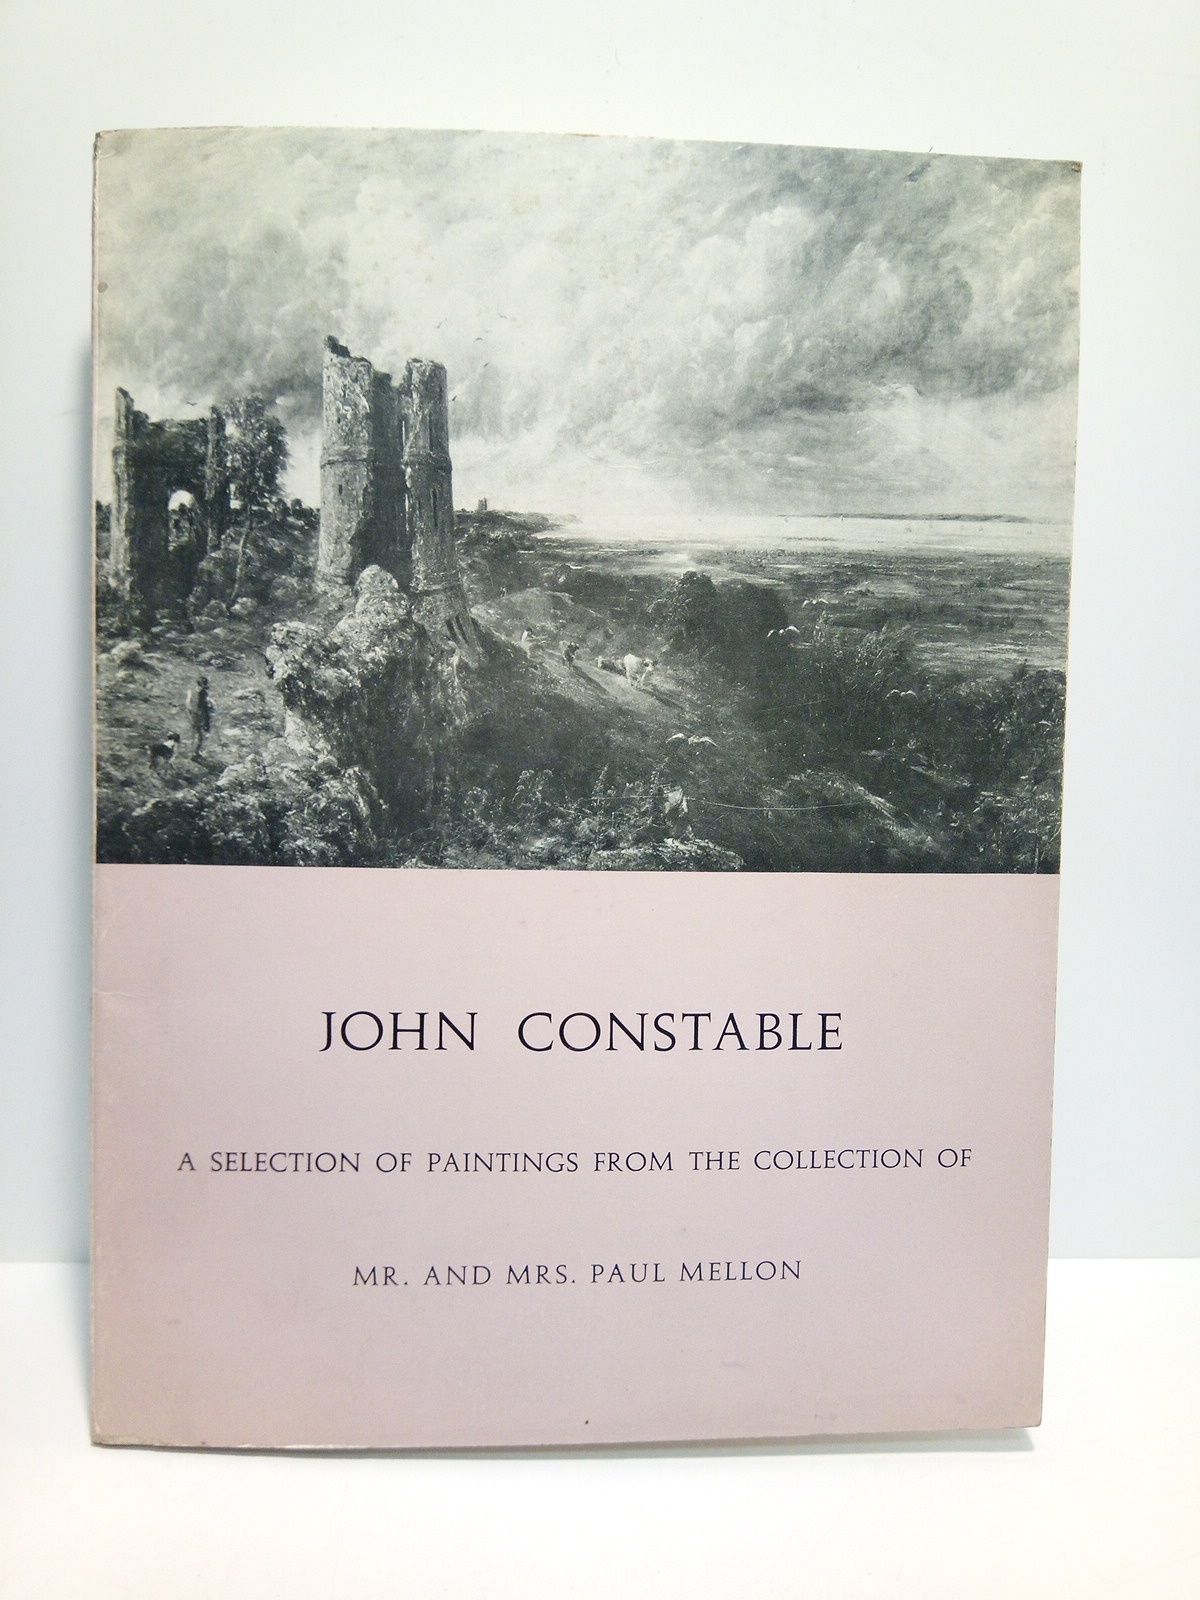 NATIONAL GALLERY OF ART, WASHINGTON, D. C. - JOHN CONSTABLE. A selection of Paintings from the Collection of Mr. and Mrs. Paul Mellon. (National Gallery of Art, Washington, D. C.: Catalogue of the Exhibition from April 30 to November 1, 1969) / Introd. by John Walker; Notes by Ross Watson